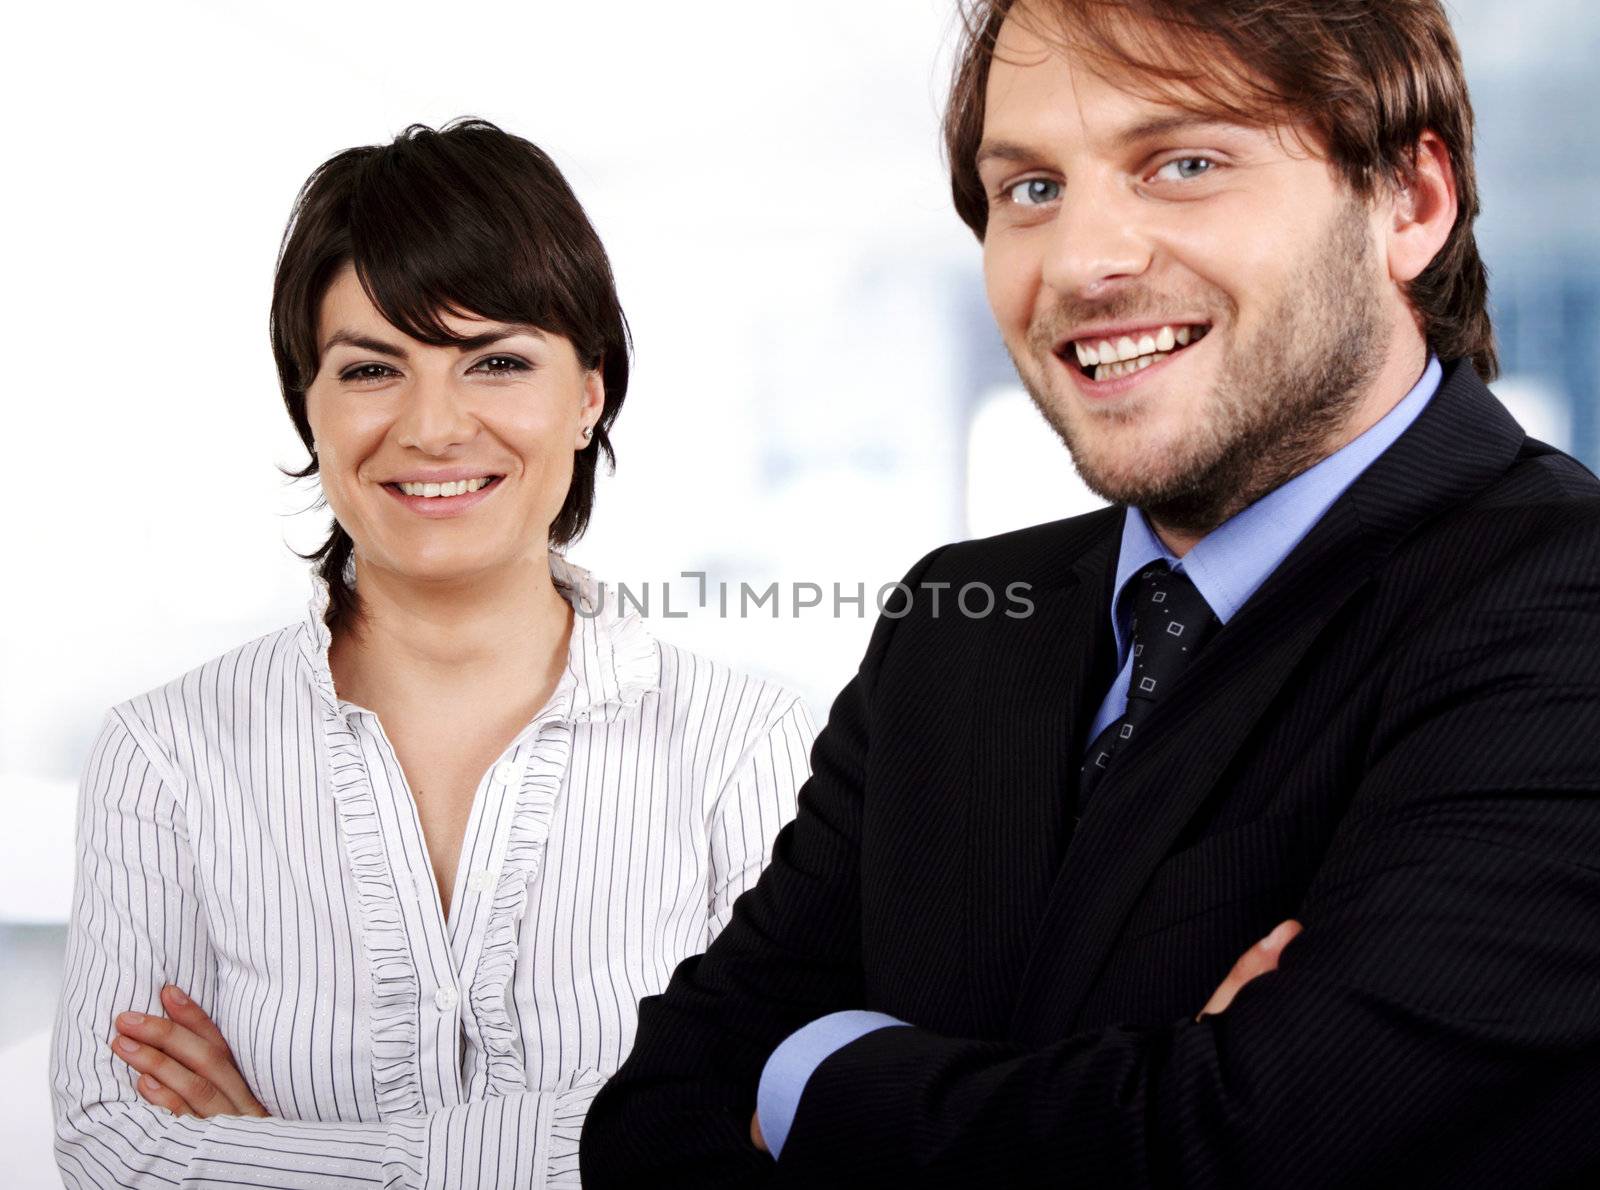 two smiling business people